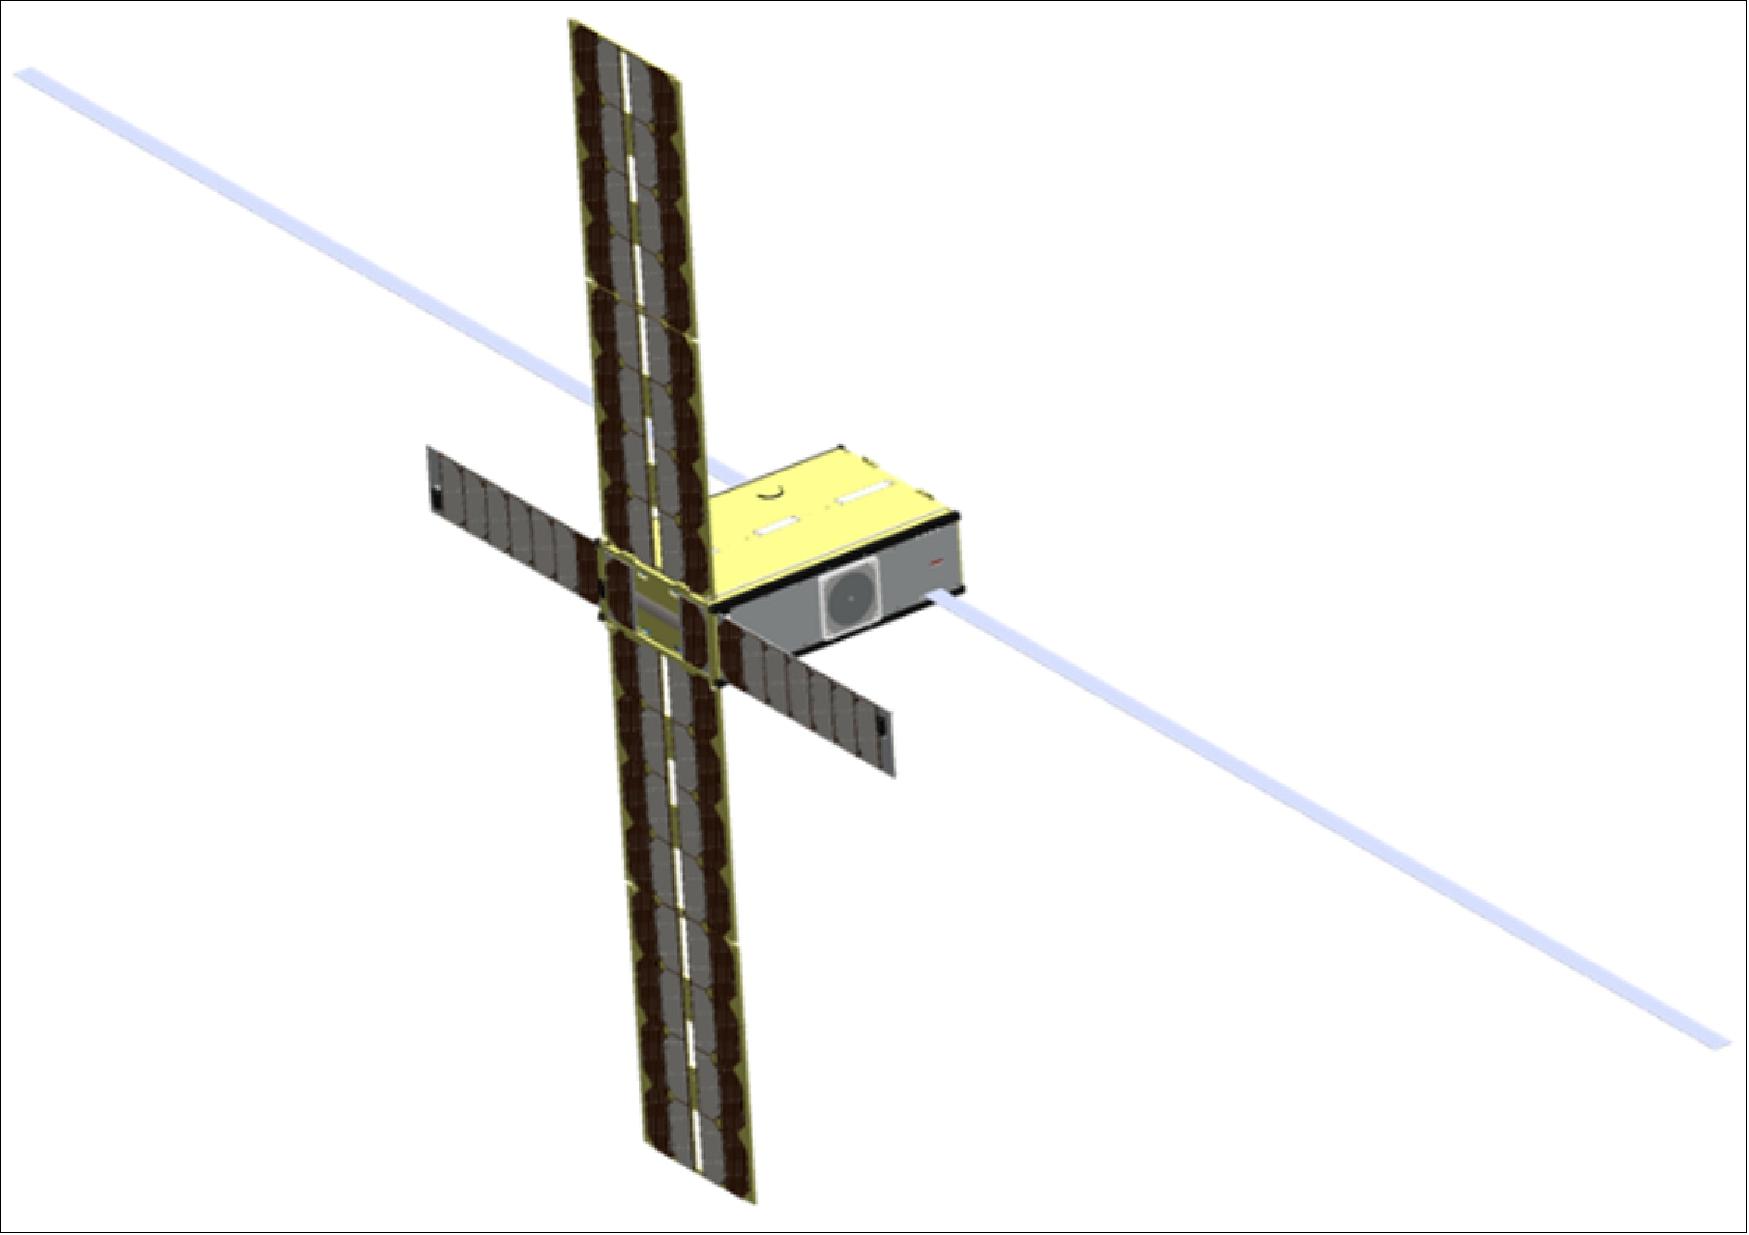 Figure 54: Juventas is a 6U CubeSat developed as a 'daughter' to the Hera mothership to perform additional asteroid research and mitigation assessment activities, equipped with a low frequency radar, 3-axis gravimeter, radio intersatellite link, a visible light camera plus accelerometer and gyros. Developed by Danish company GomSpace and GMV in Romania, Juventas will measure the gravity field as well as the internal structure of the smaller of the two Didymos asteroids (image credit: GomSpace)